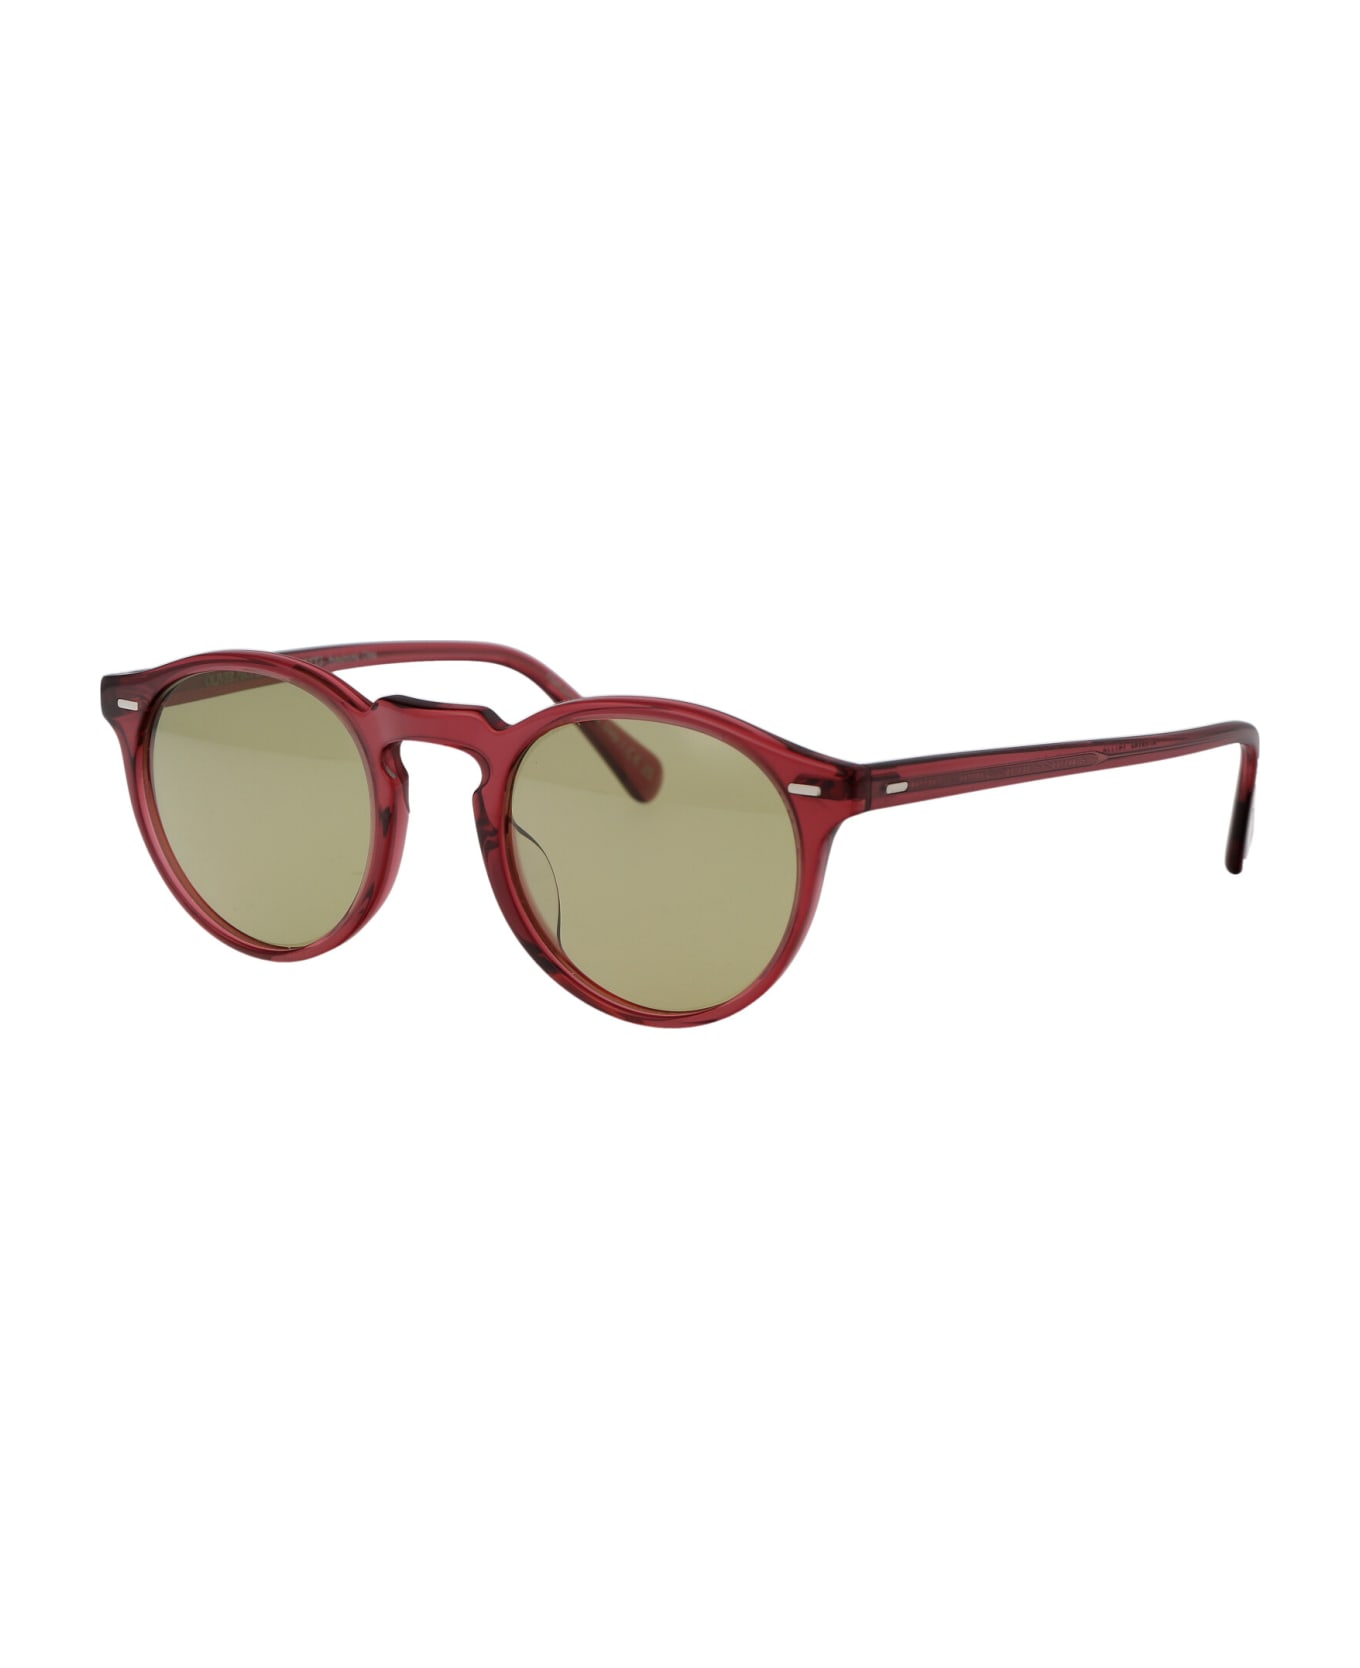 Oliver Peoples Gregory Peck Sun Sunglasses - 17644Montblanc tortoise-shell square sunglasses